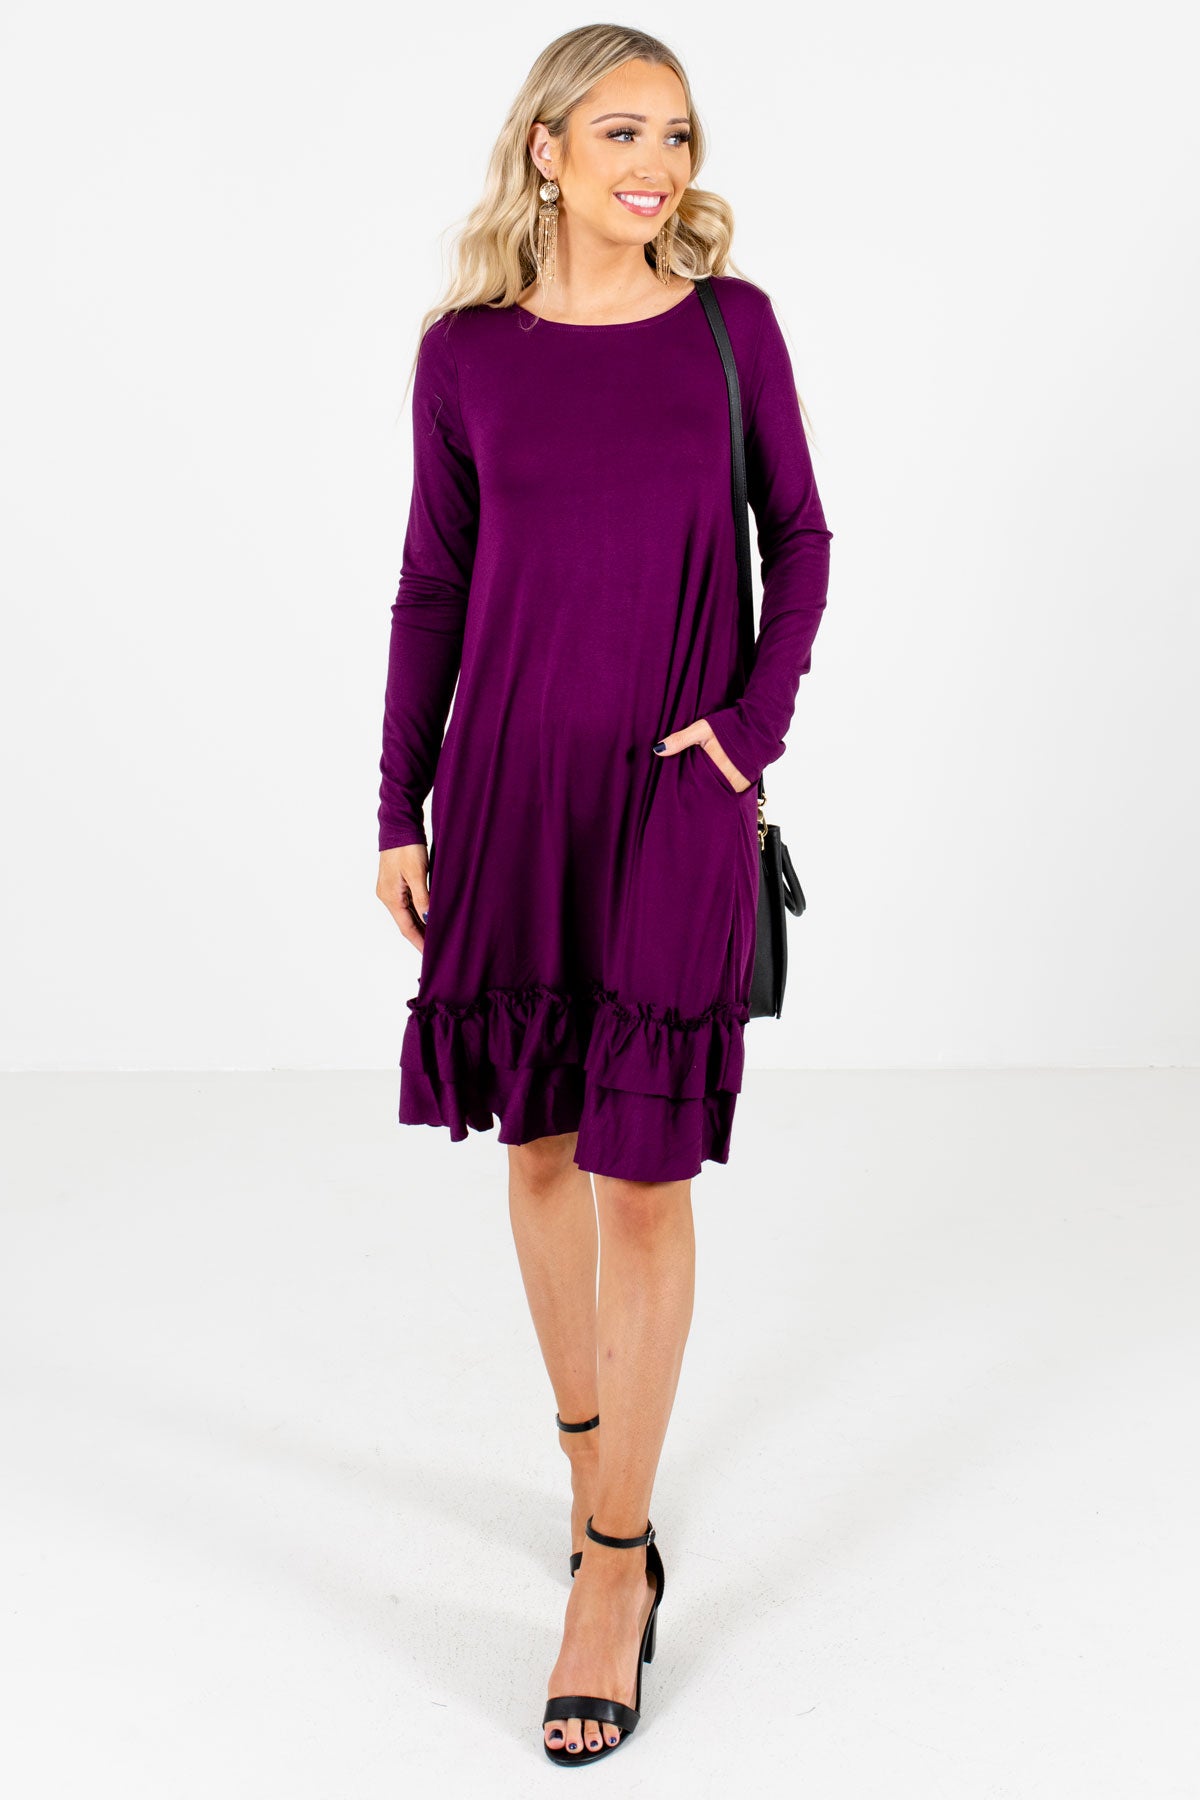 Purple Cute and Comfortable Boutique Knee-Length Dresses for Women